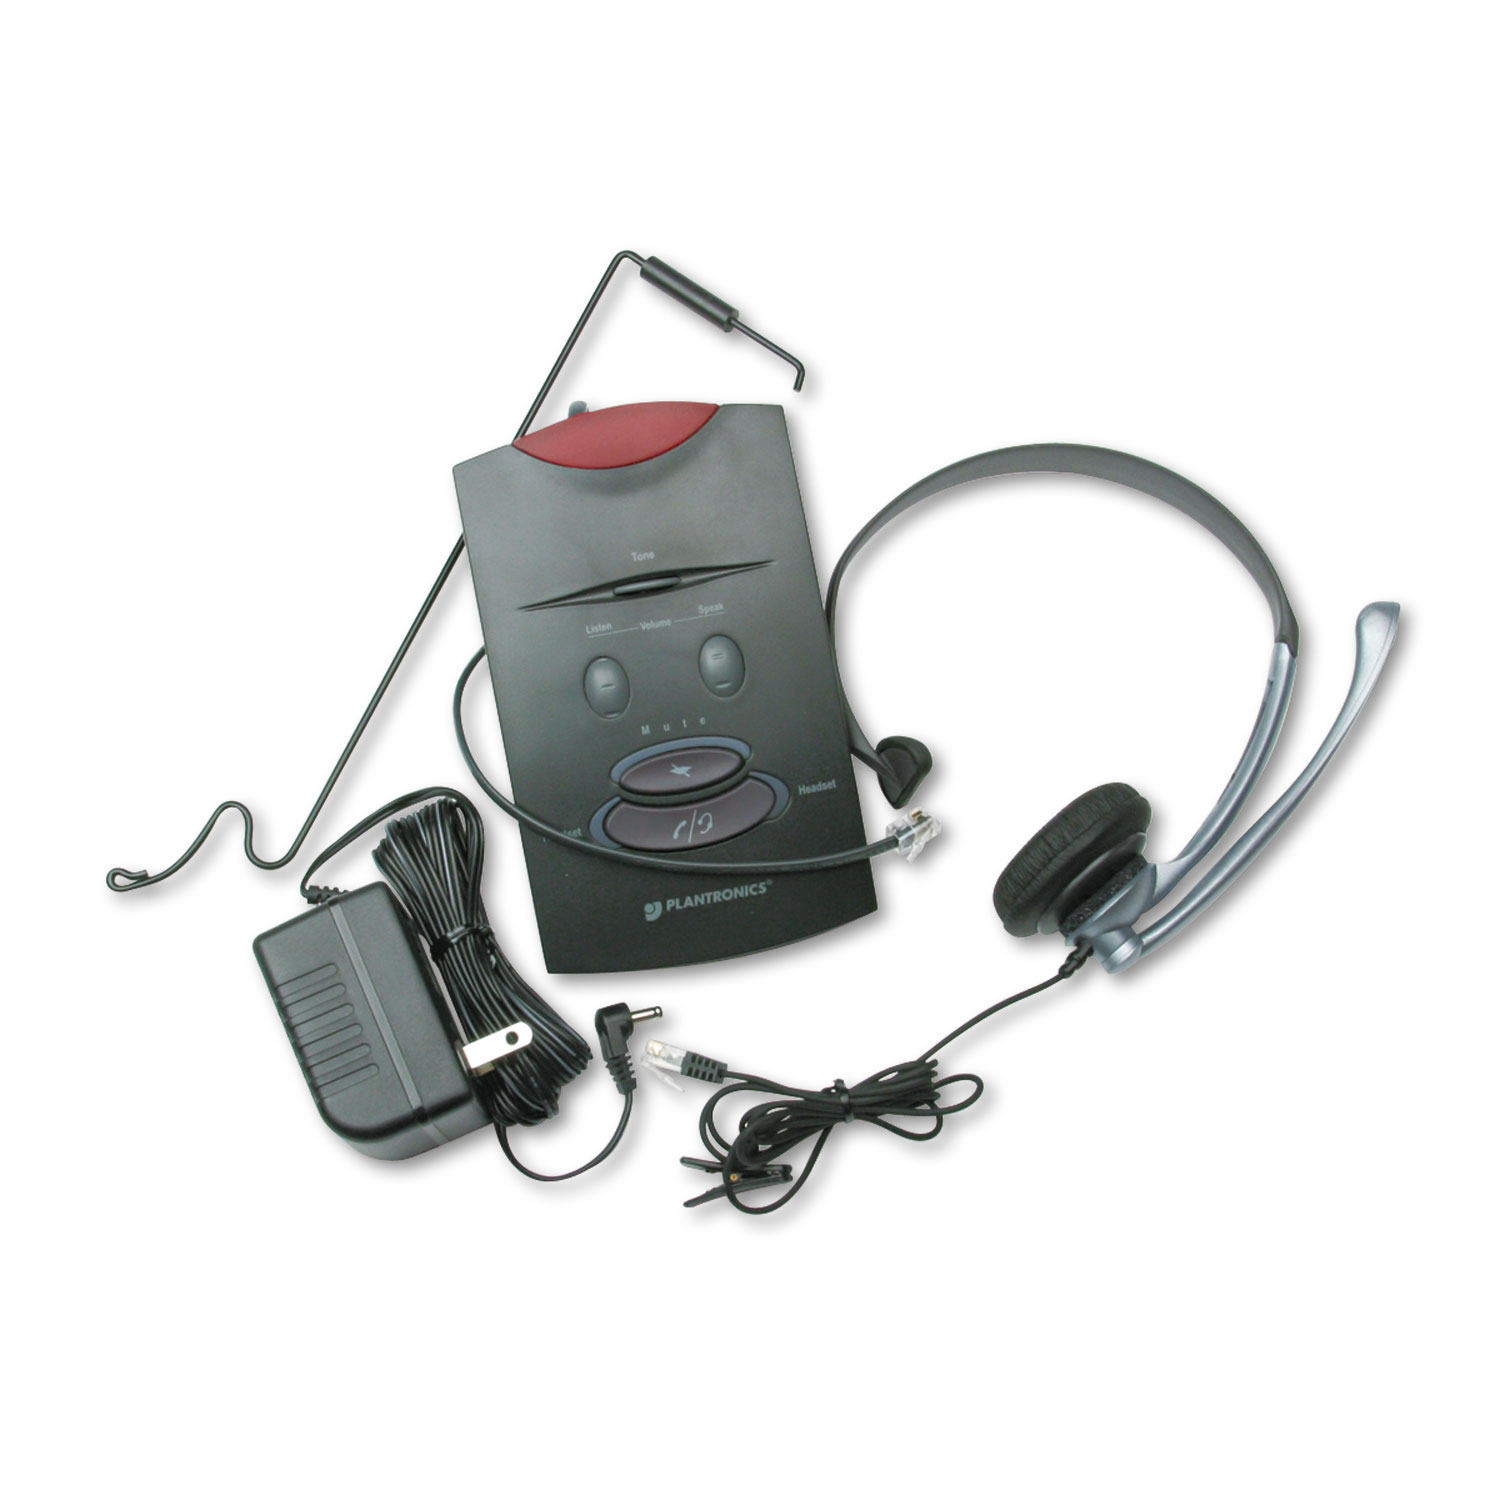 S11 System Over-the-Head Telephone Headset with Noise Canceling Microphone